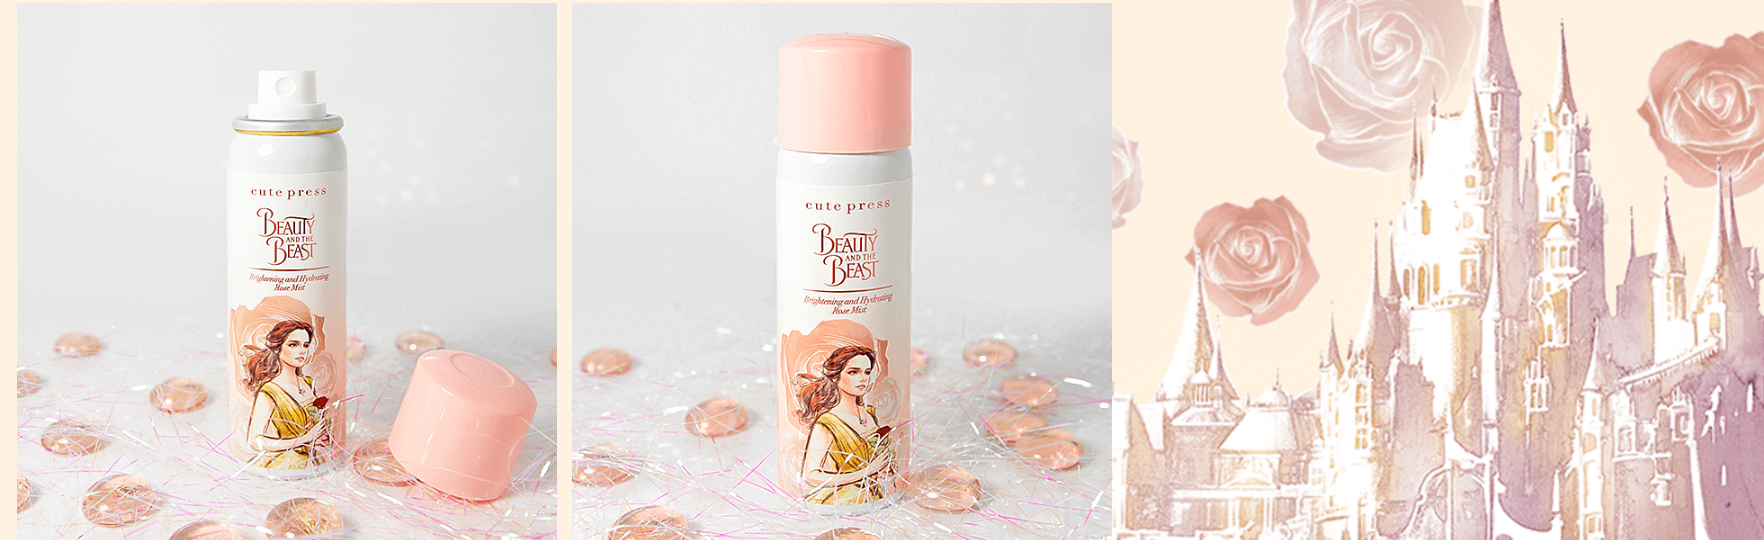 cute press Beauty and the Beast makeup collection-Pamper.my